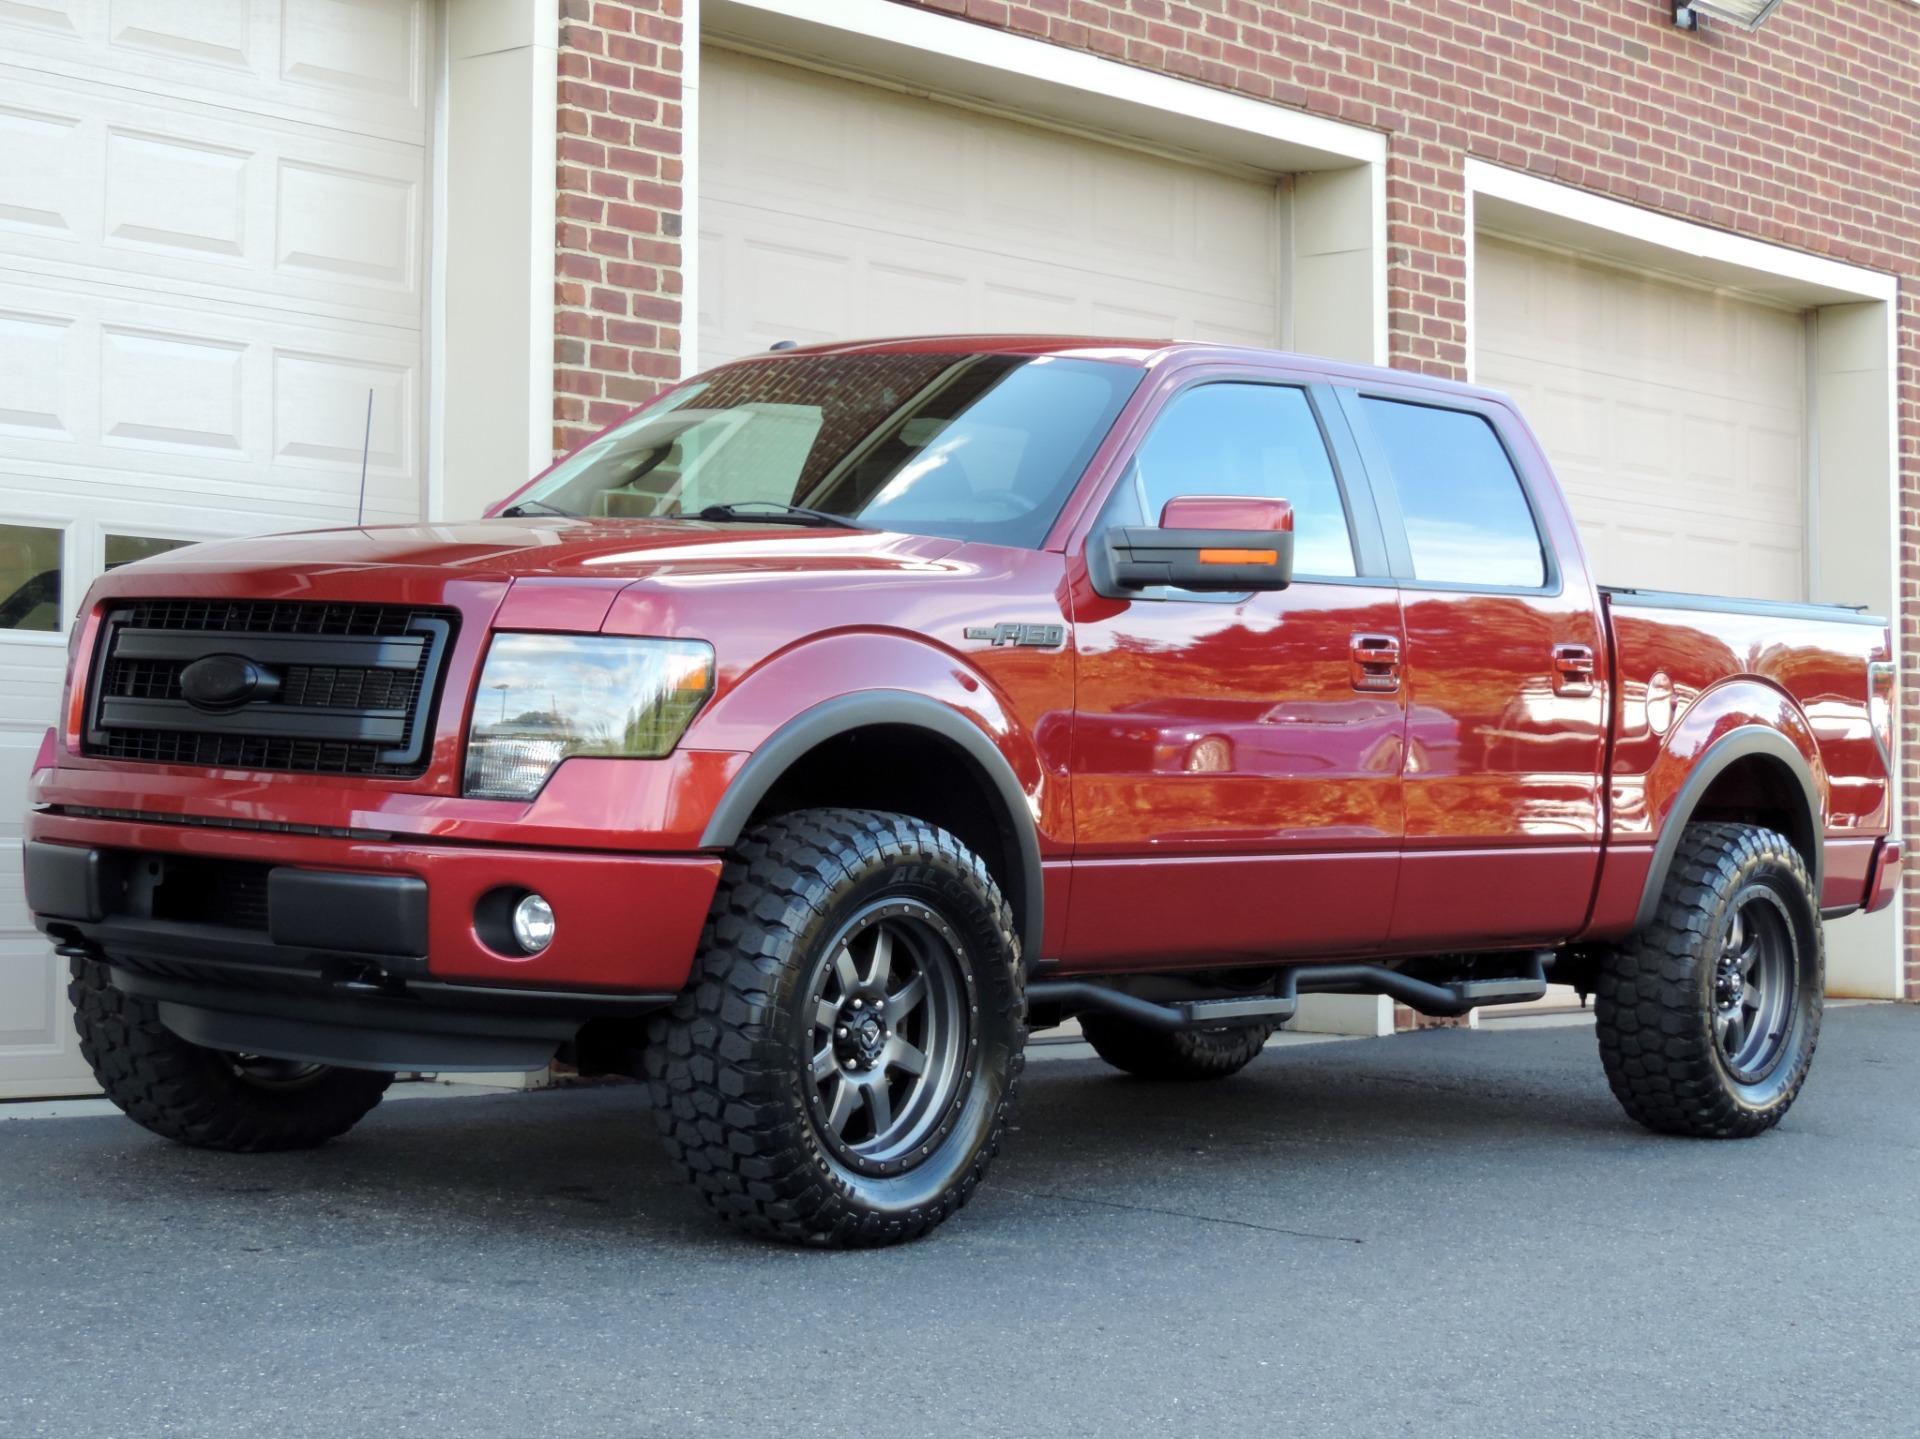 2013 Ford F-150 FX4 Stock # D09922 for sale near Edgewater Park, NJ